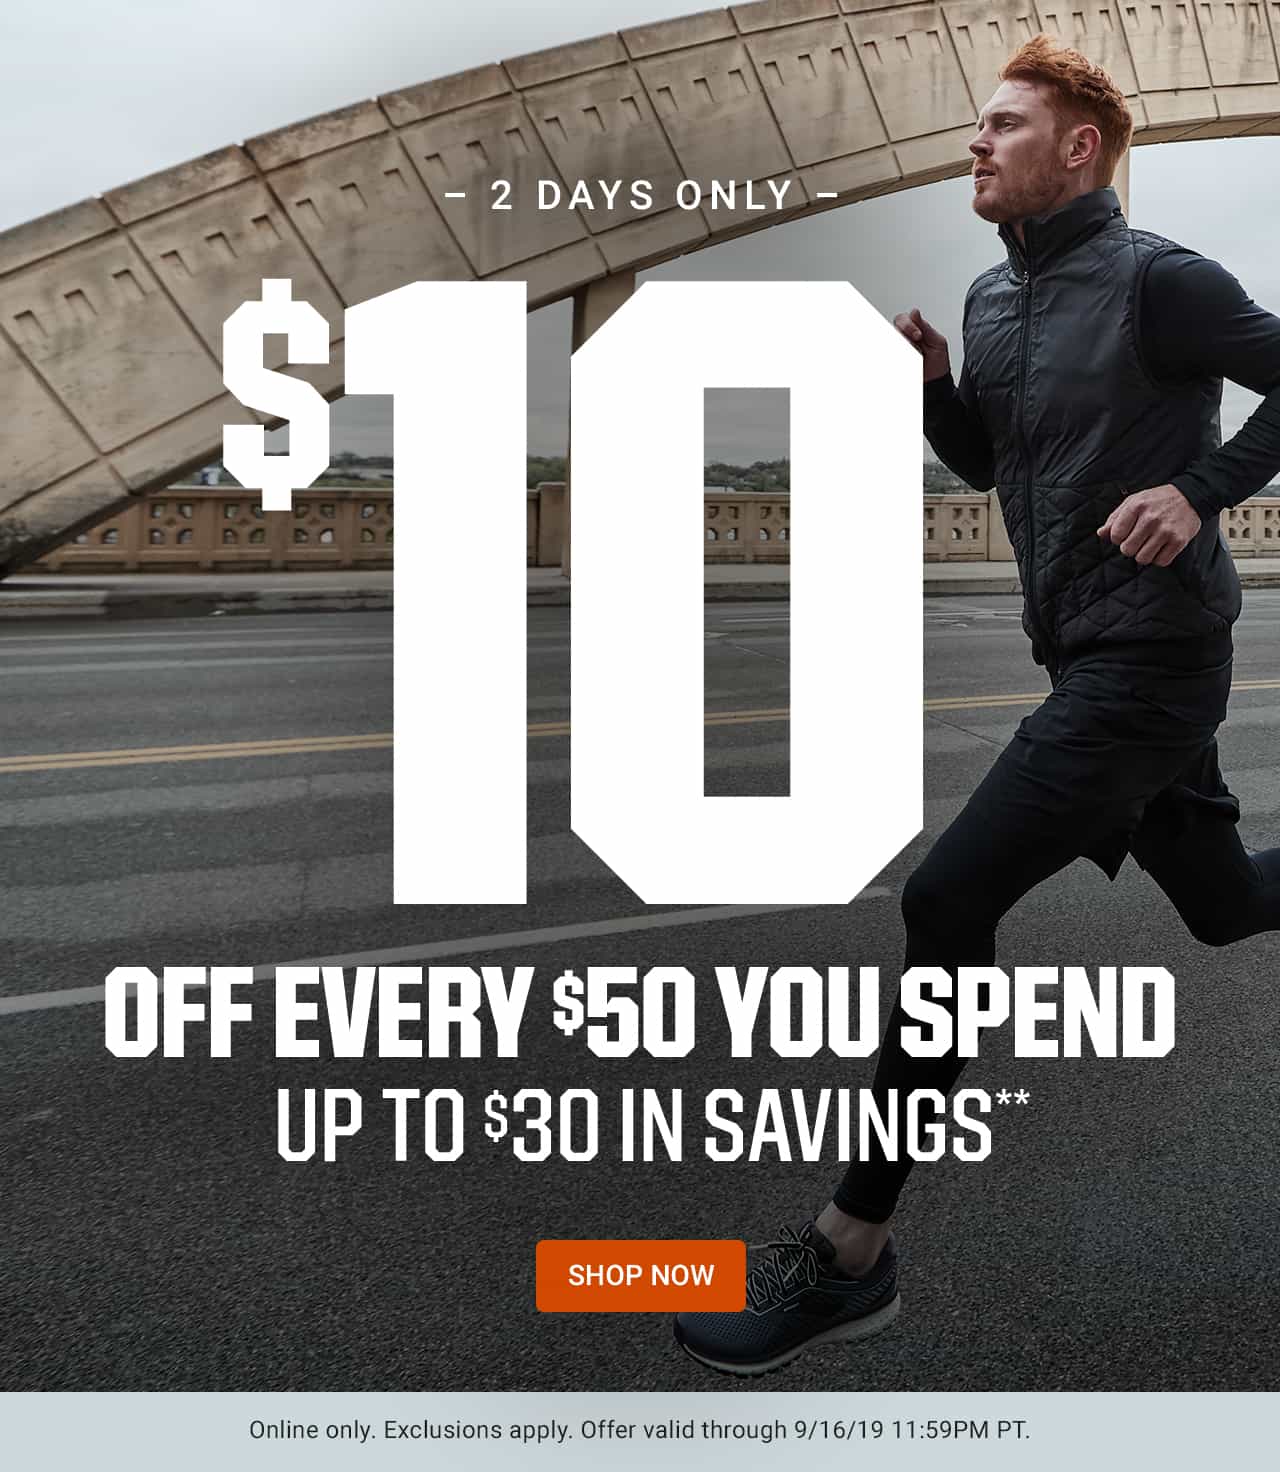 Take $10 off every $50 you spend, up to $30 in savings.** Online only. Exclusions apply. Offer valid through September 16, 2019 11:59PM PT. Shop now. Missed this offer? You can still shop this week's deals!